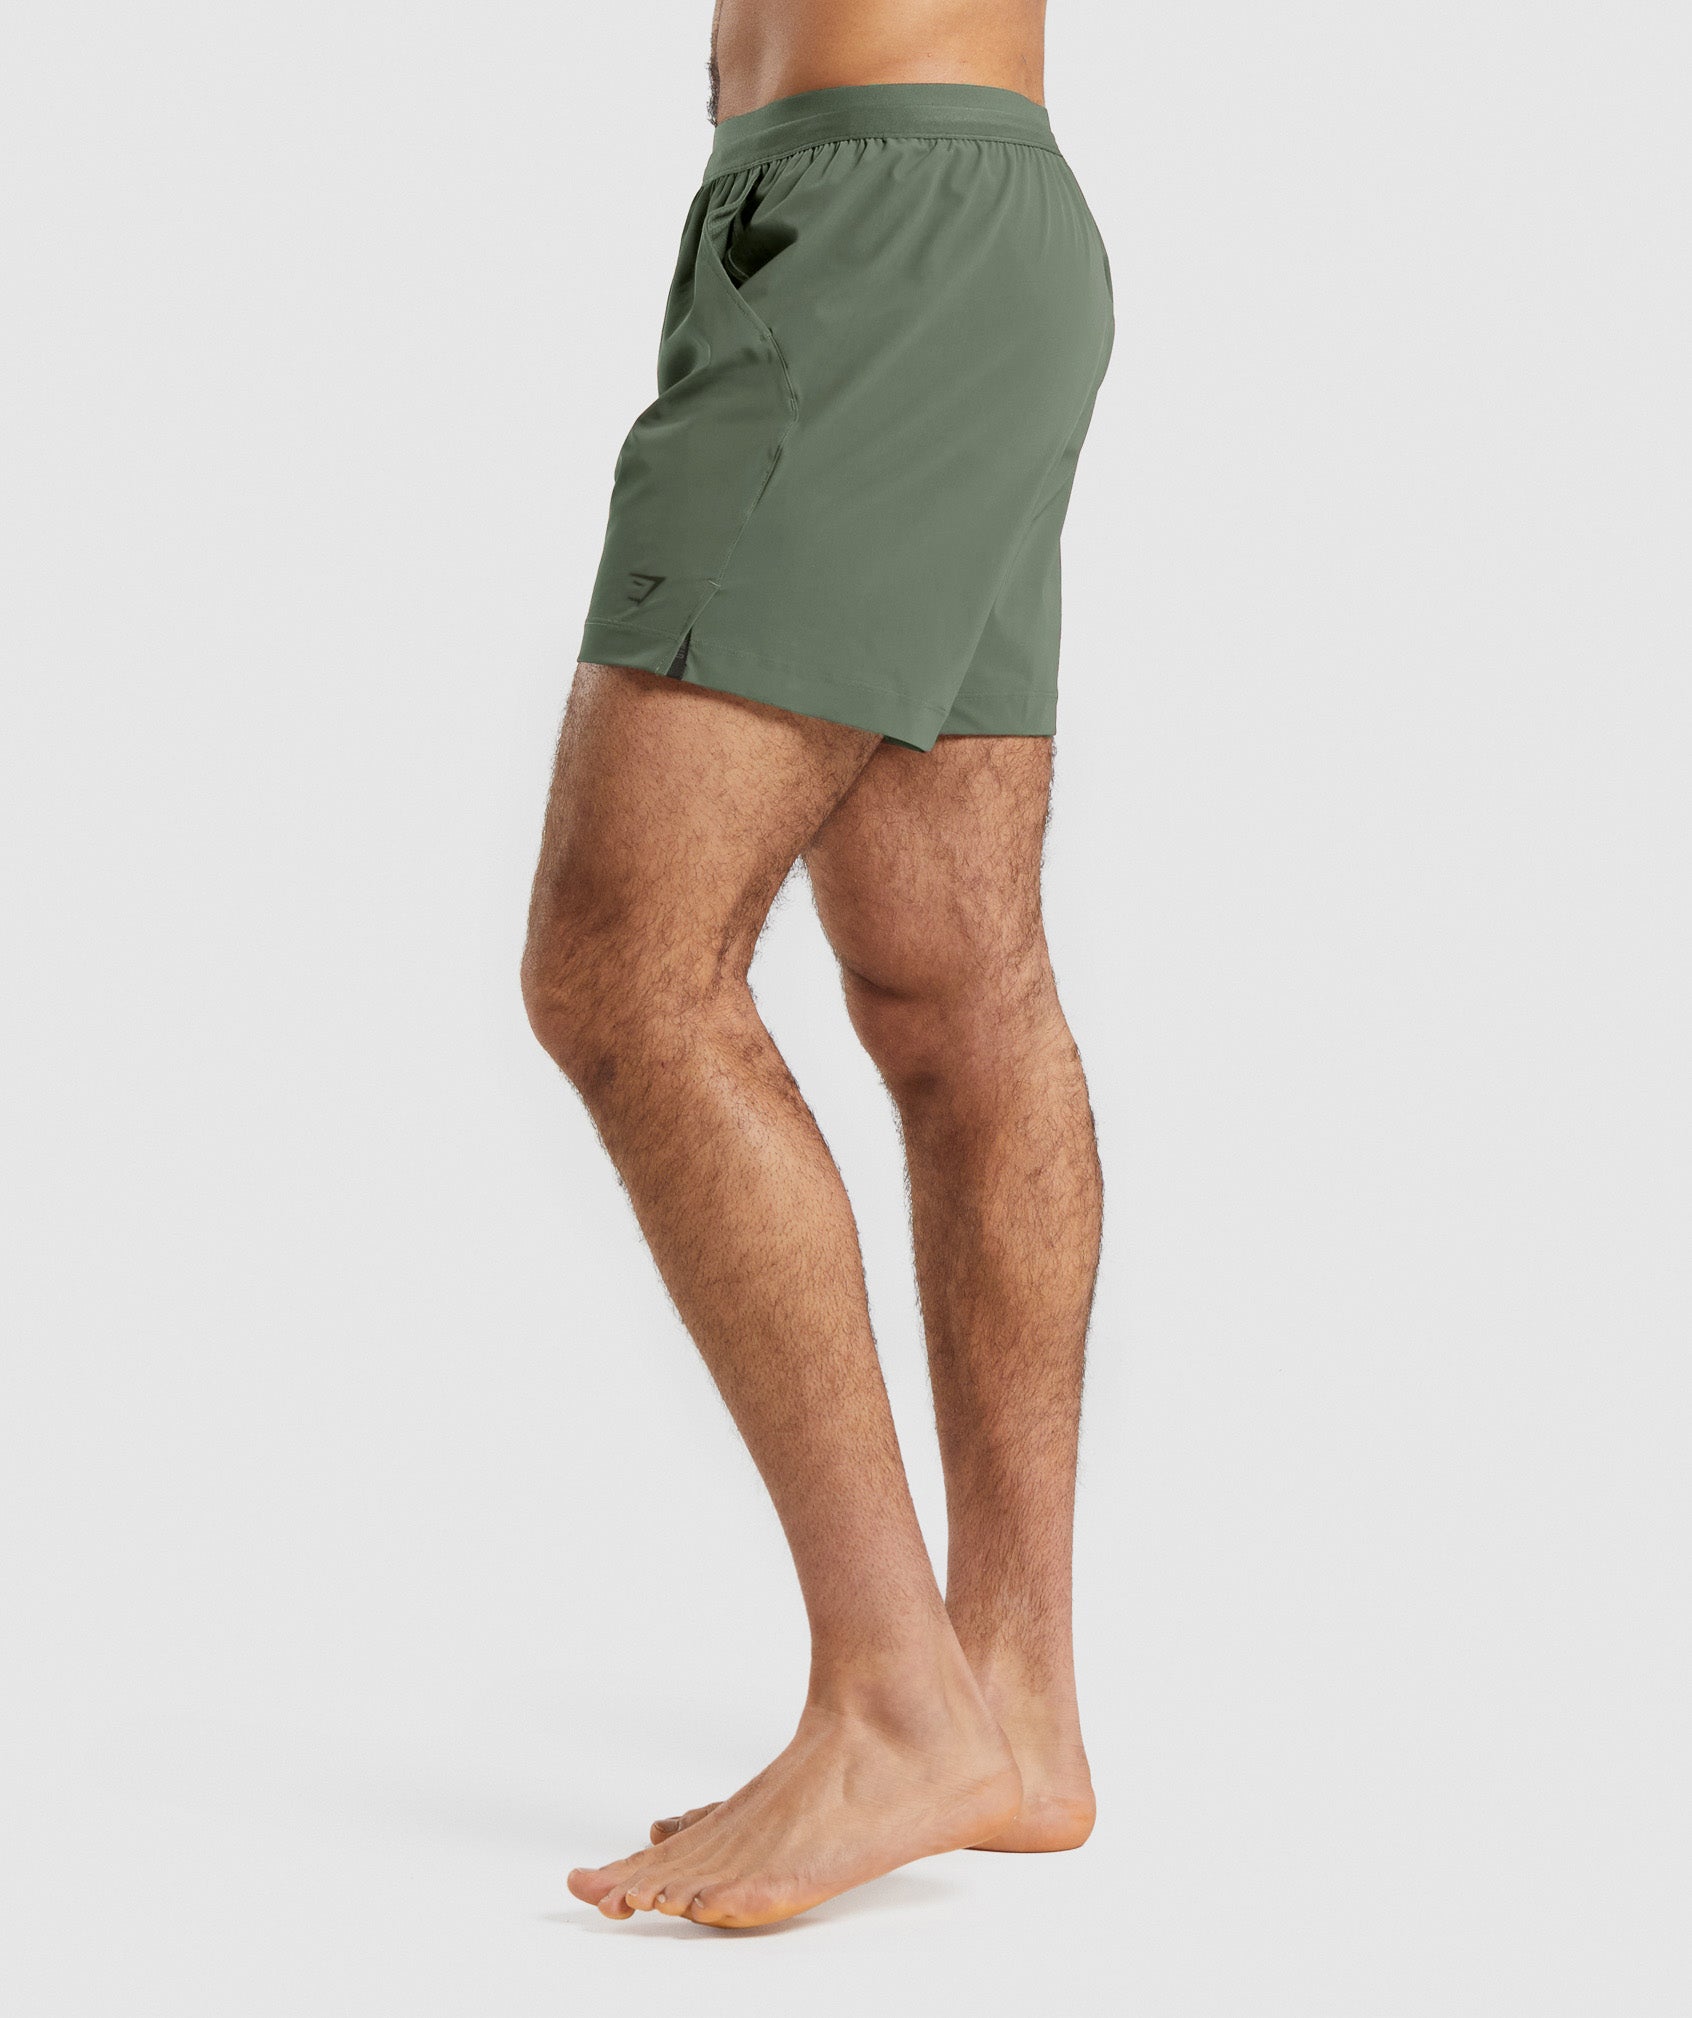 Studio Shorts in Core Olive - view 3